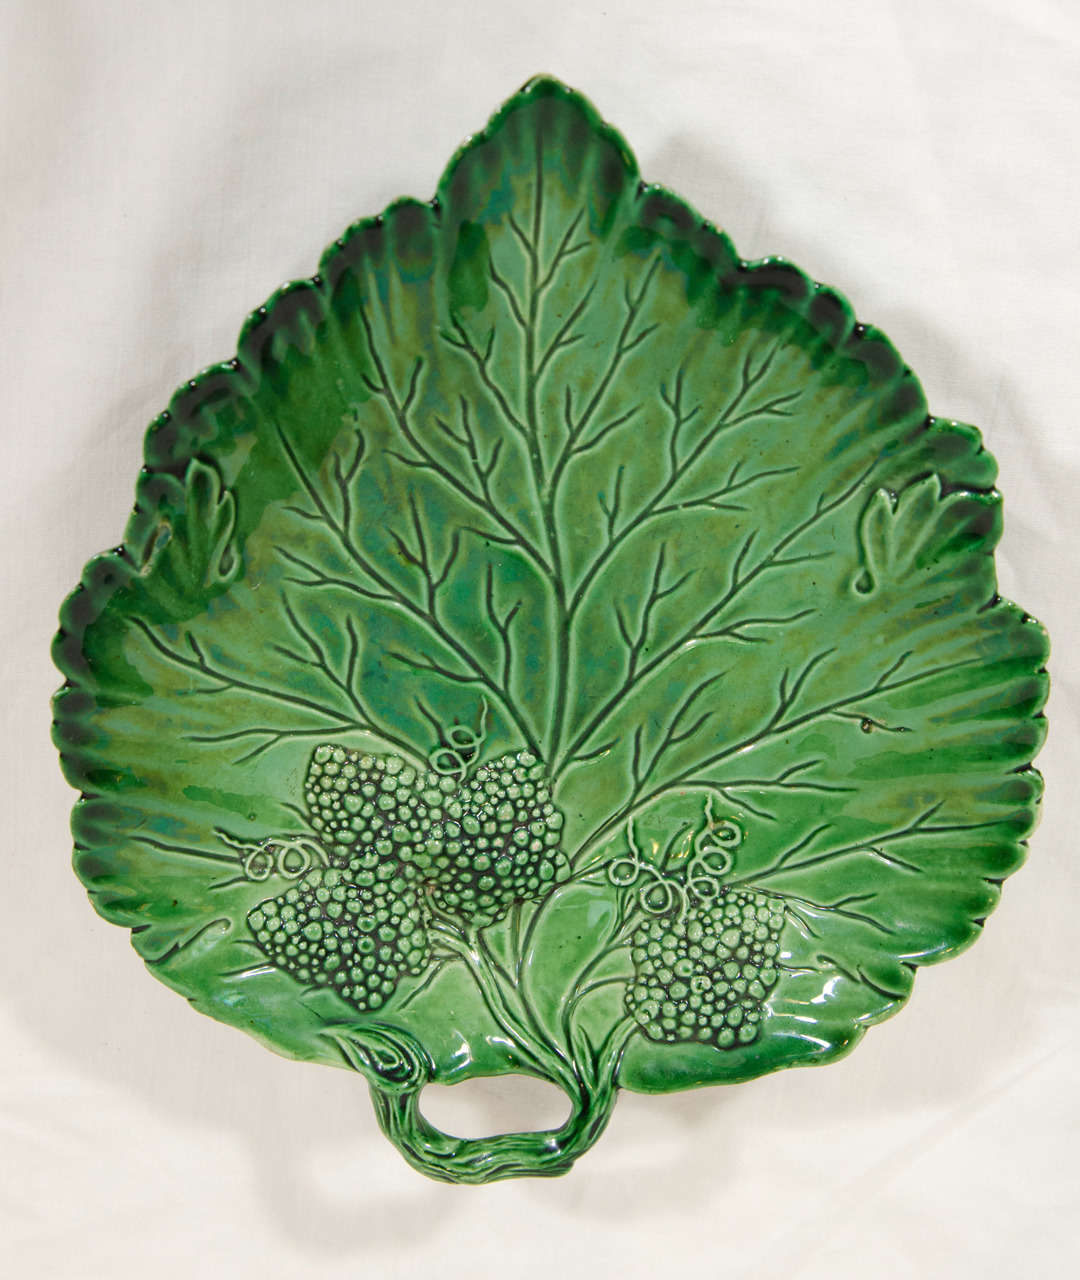 Provenance: Ex Jonathan Horne Antiques
An 18th century green glazed creamware grape leaf molded with impressed grapes.
The reverse with Jonathan Horne Antiques paper label.